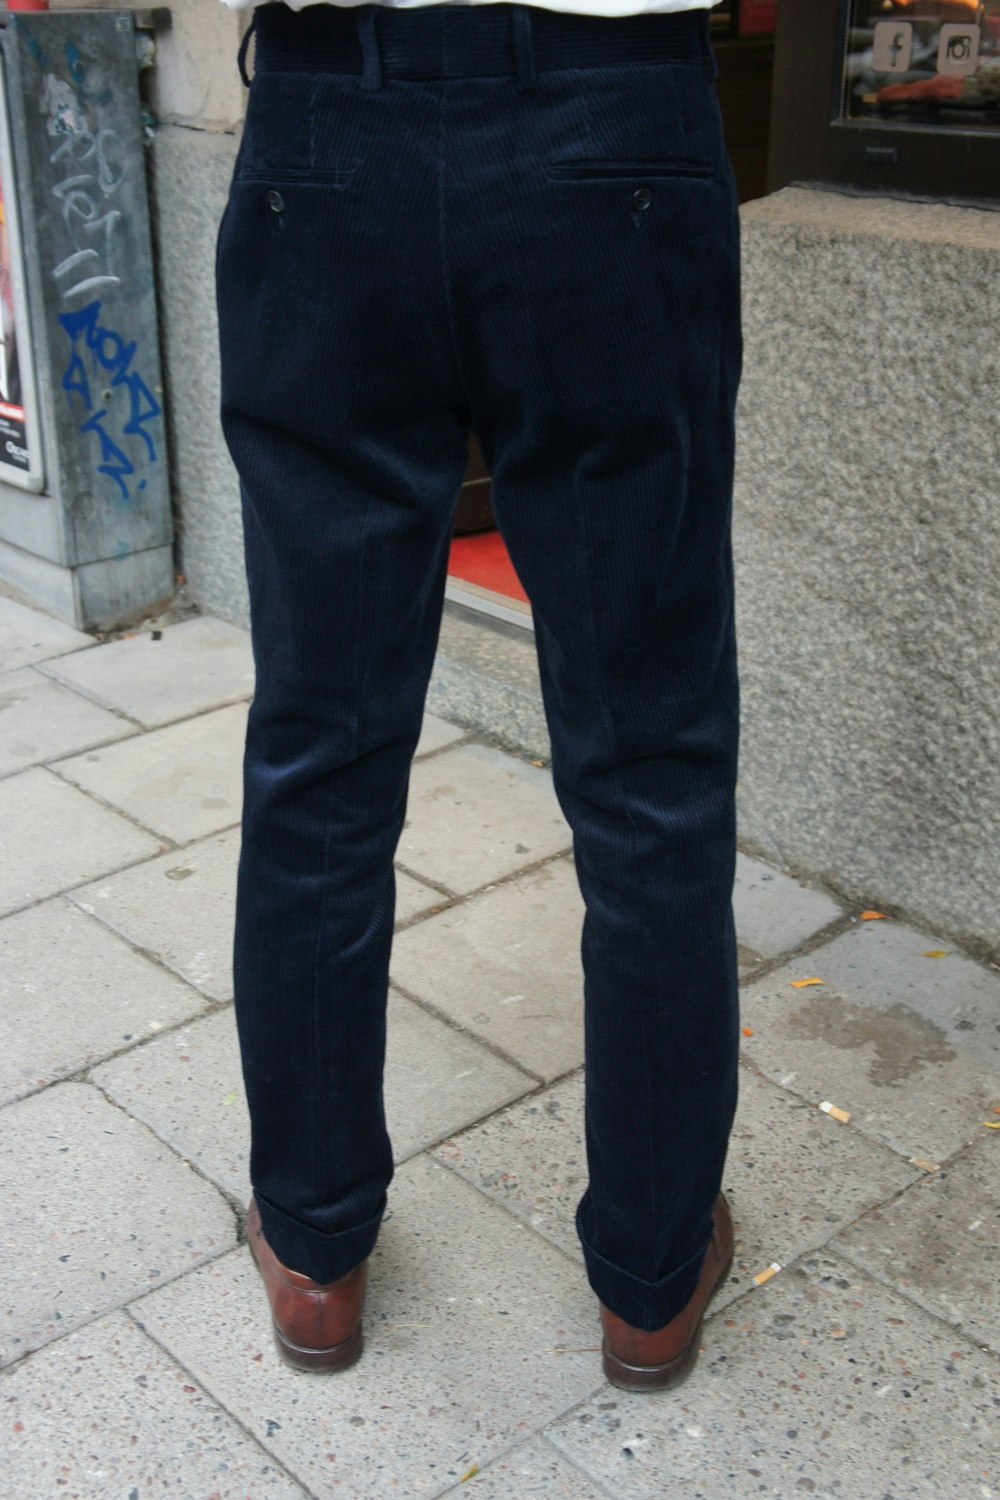 Solid High Waist Corduroy Trousers - Navy Blue